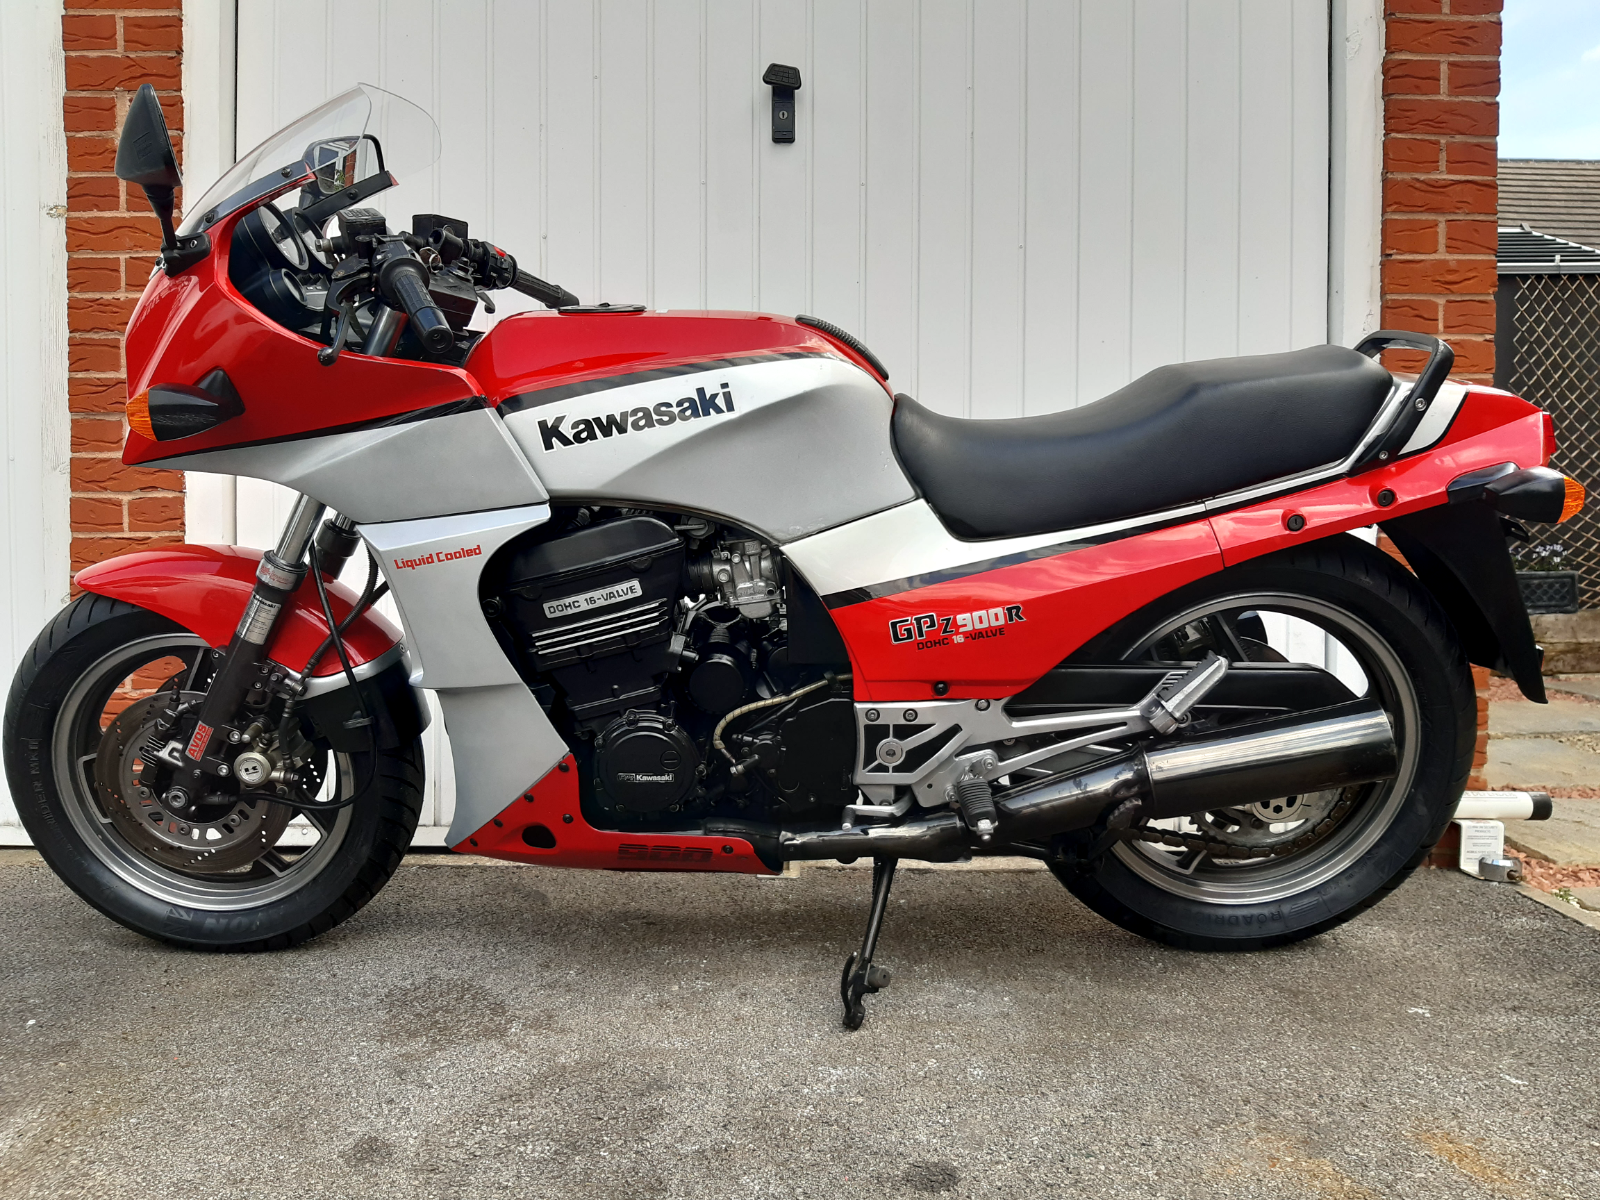 Kawasaki GPZ900R A2 in great condition and low miles. Fully recommisisoned. - Picture 1 of 19